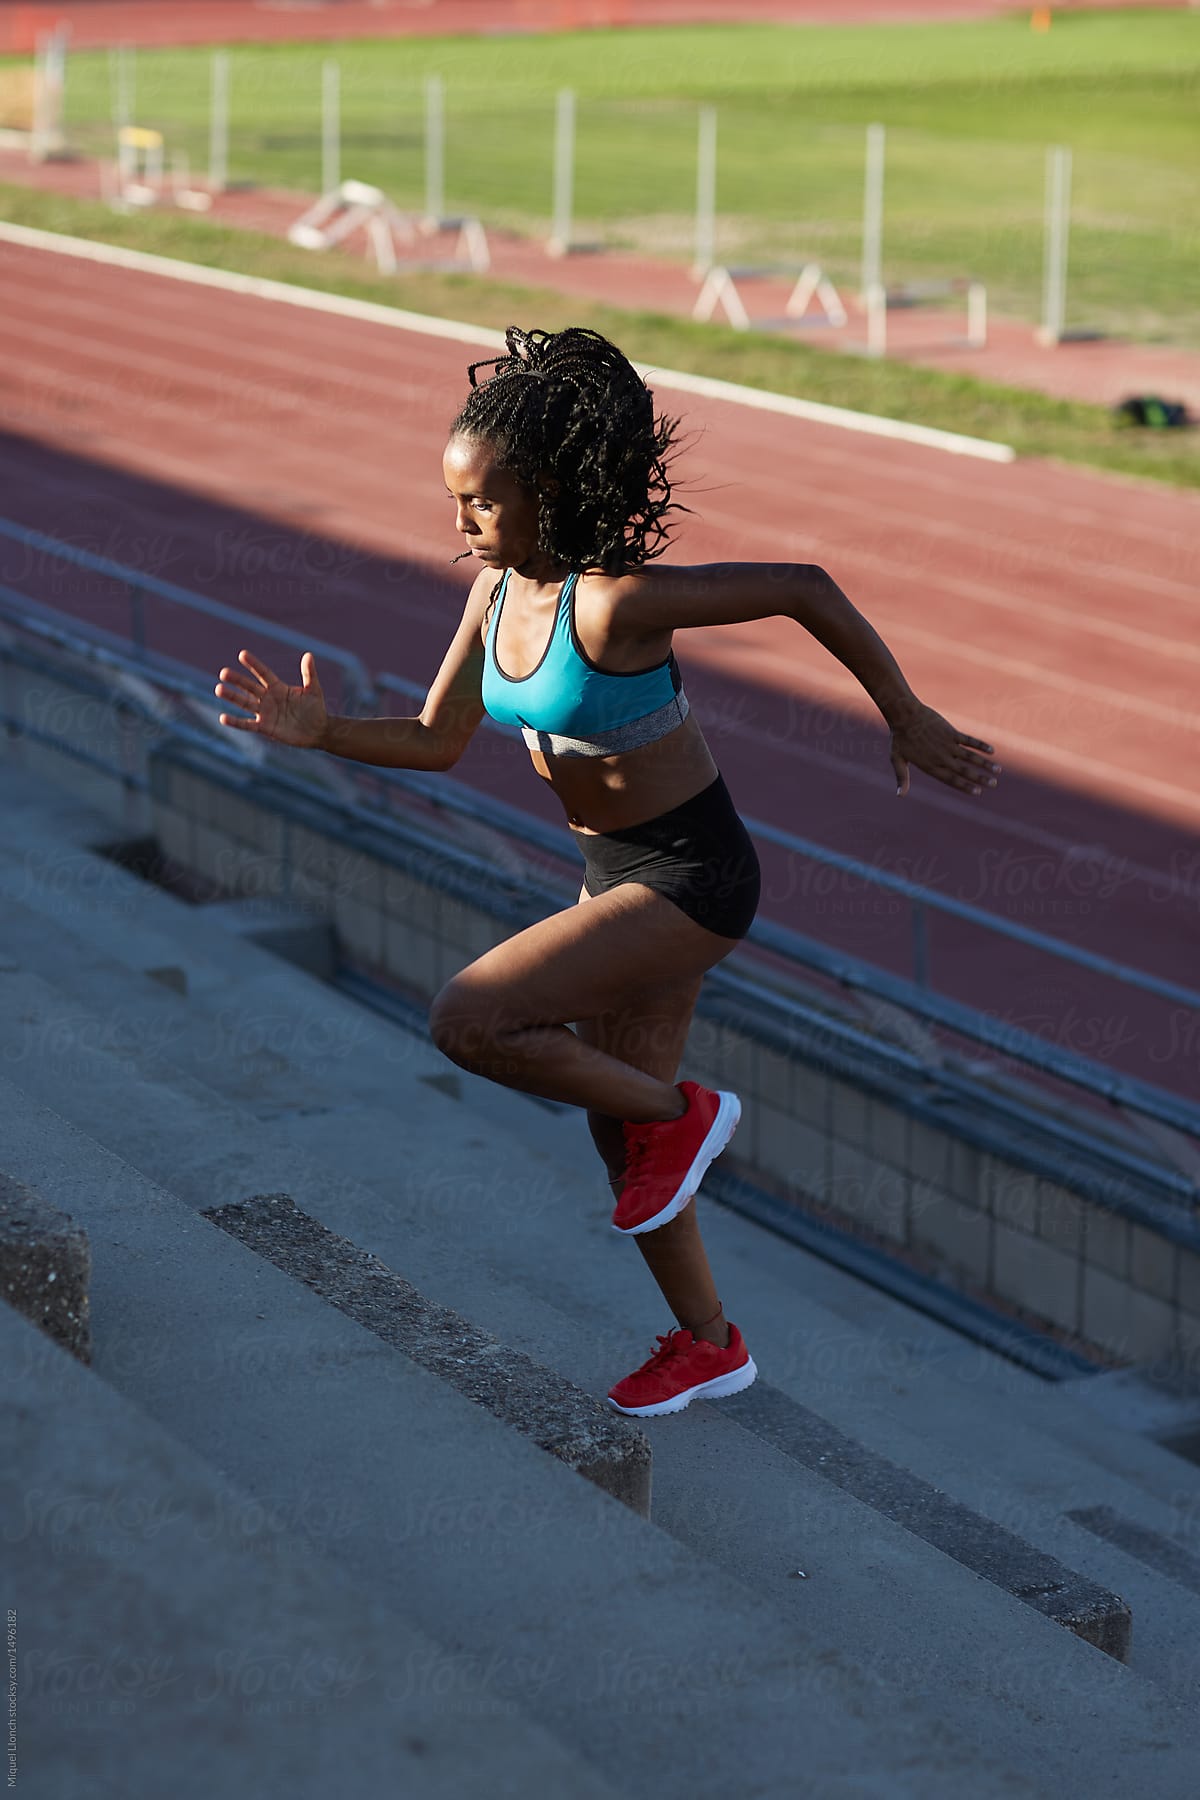 Black athlete steps up with energy in the stadium